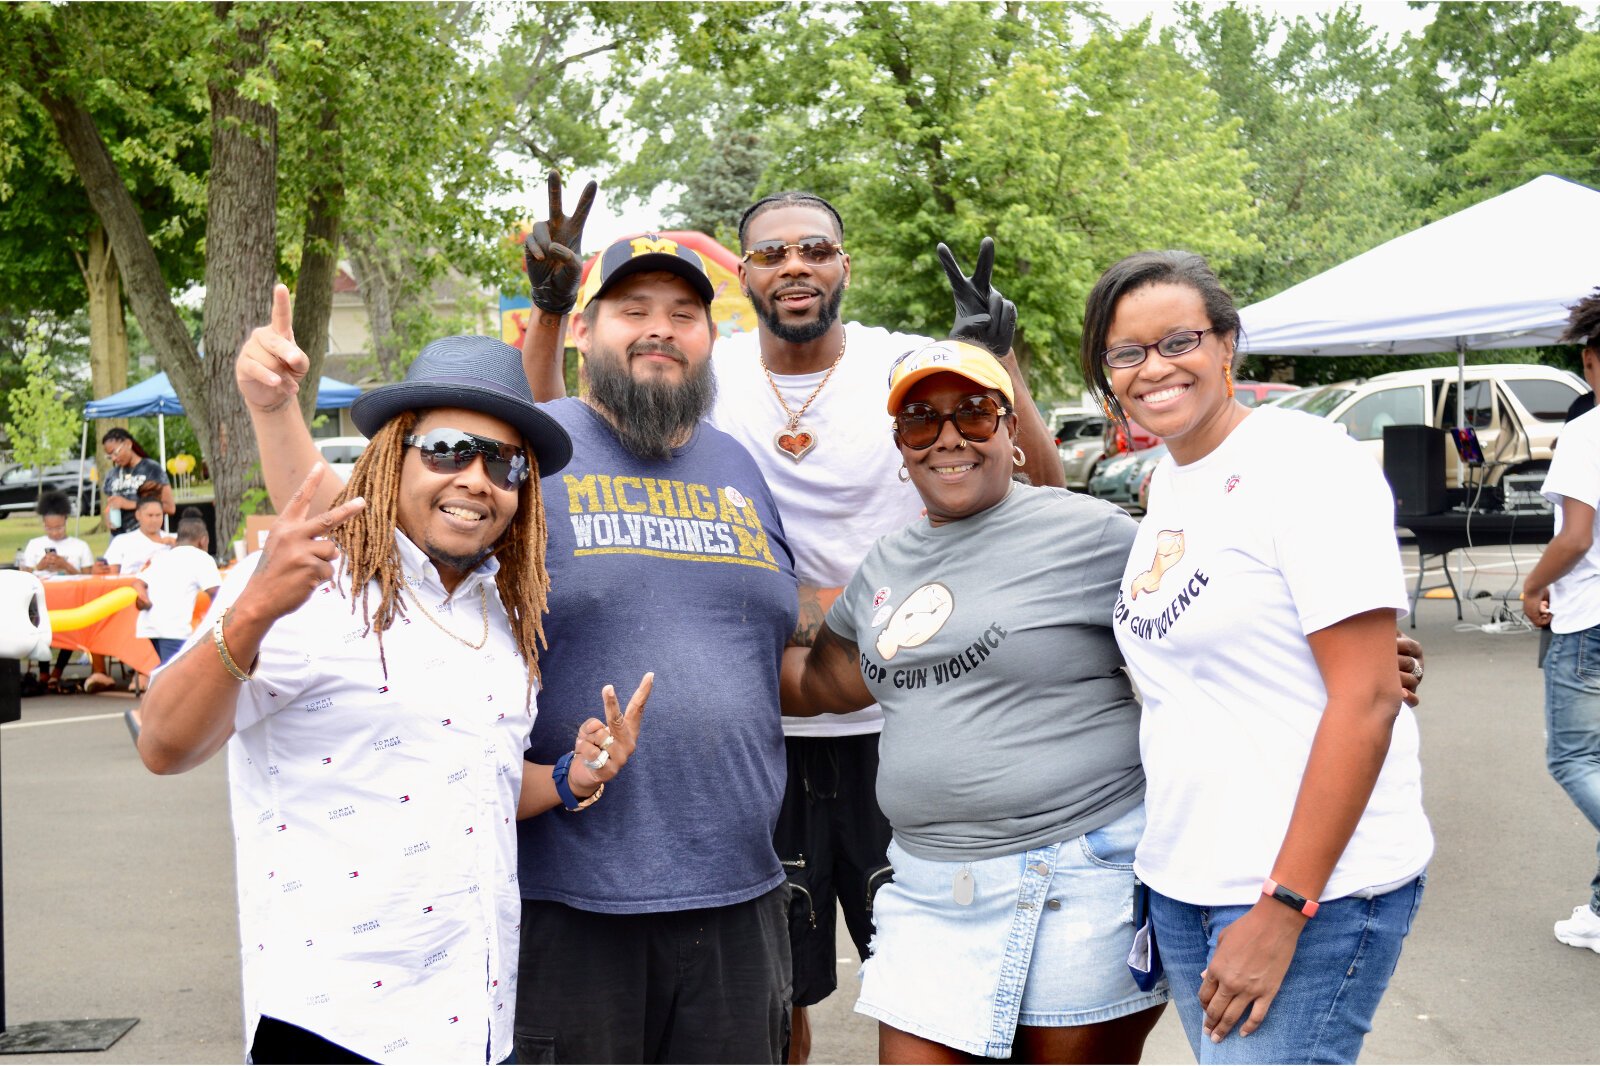 Some of the many leaders behind the rally. From left, Michael Wilder (Group Violence Intervention, Peace During War), Kalamazoo City Commissioner Estevan Juarez, Sammy Graves (BLOCKS Club), Gwendolyn Hooker (H.O.P.E.), Charlae Davis (ISAAC).